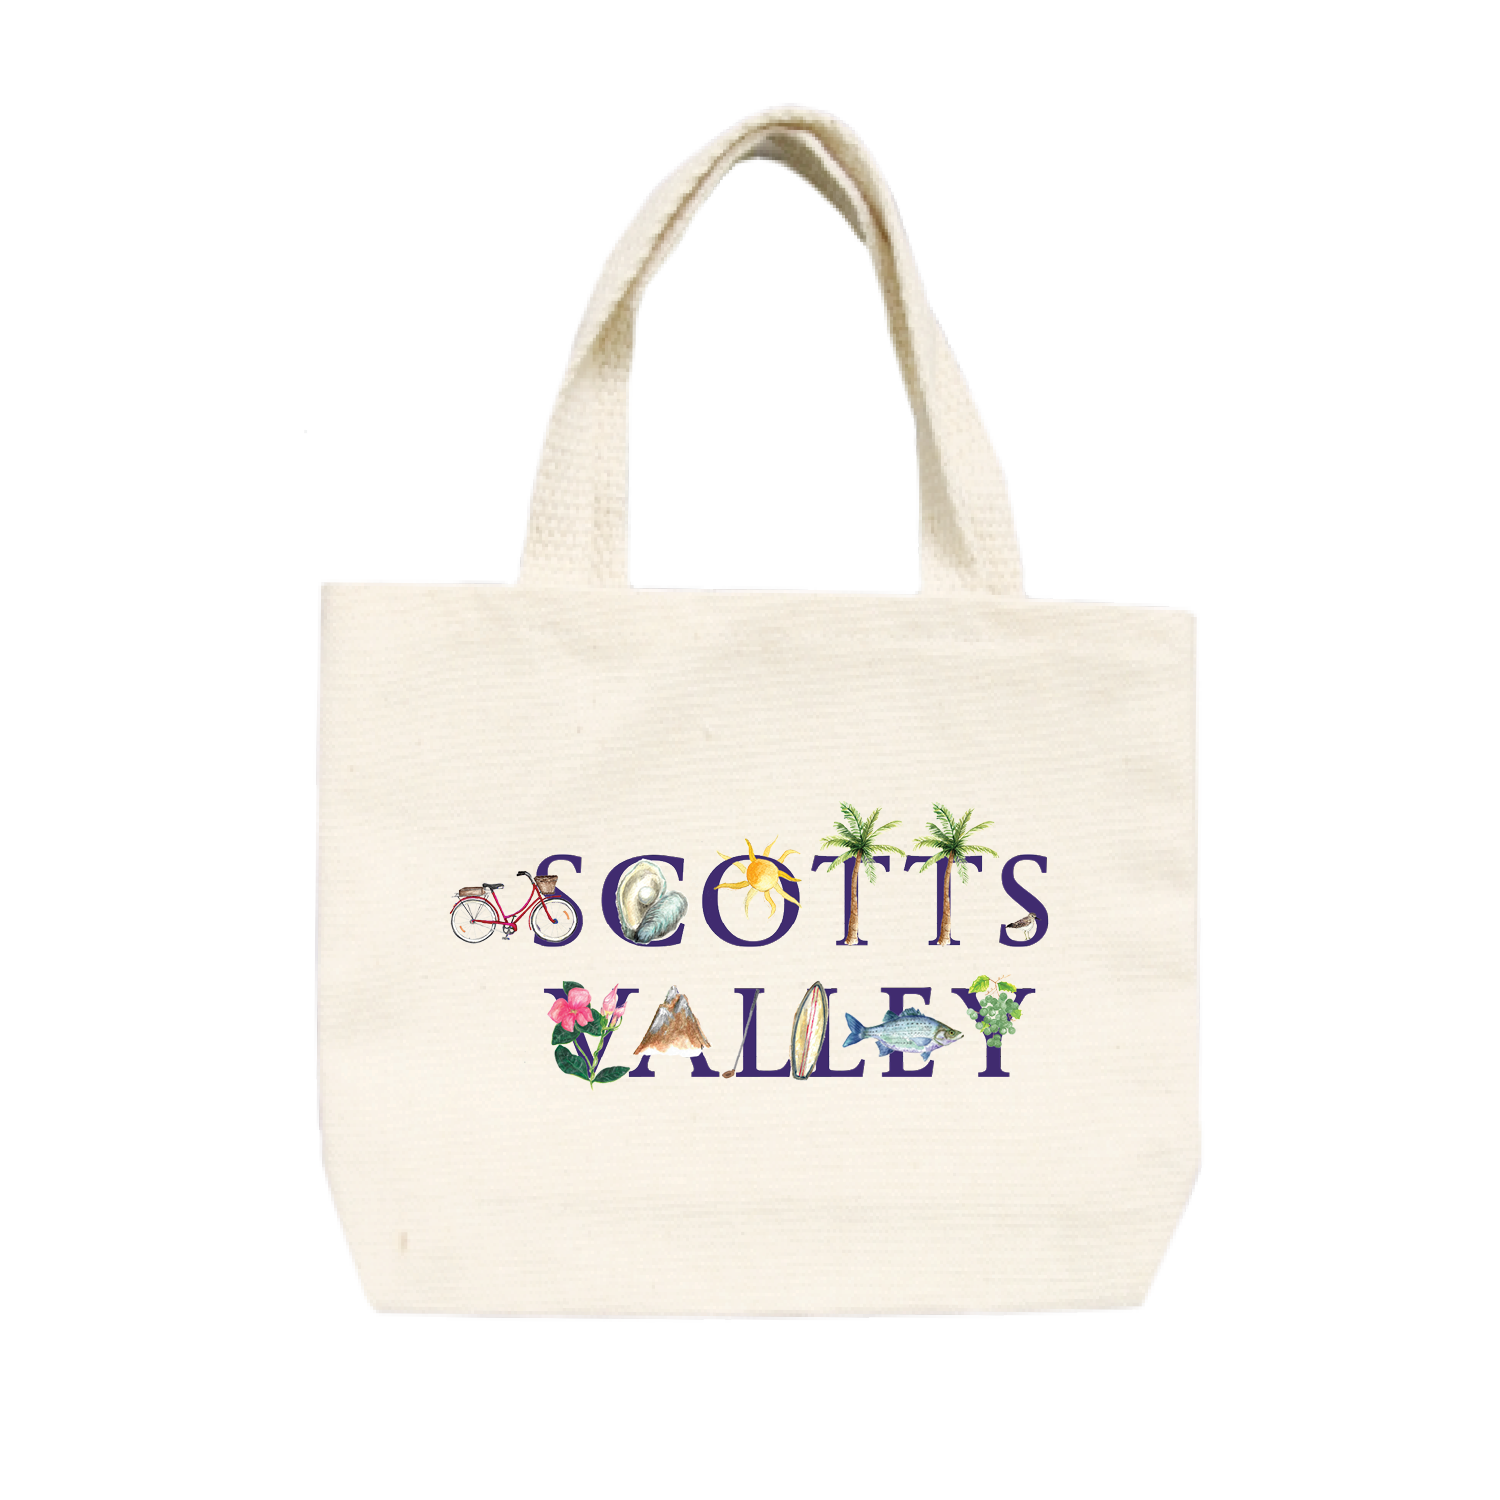 scotts valley small tote